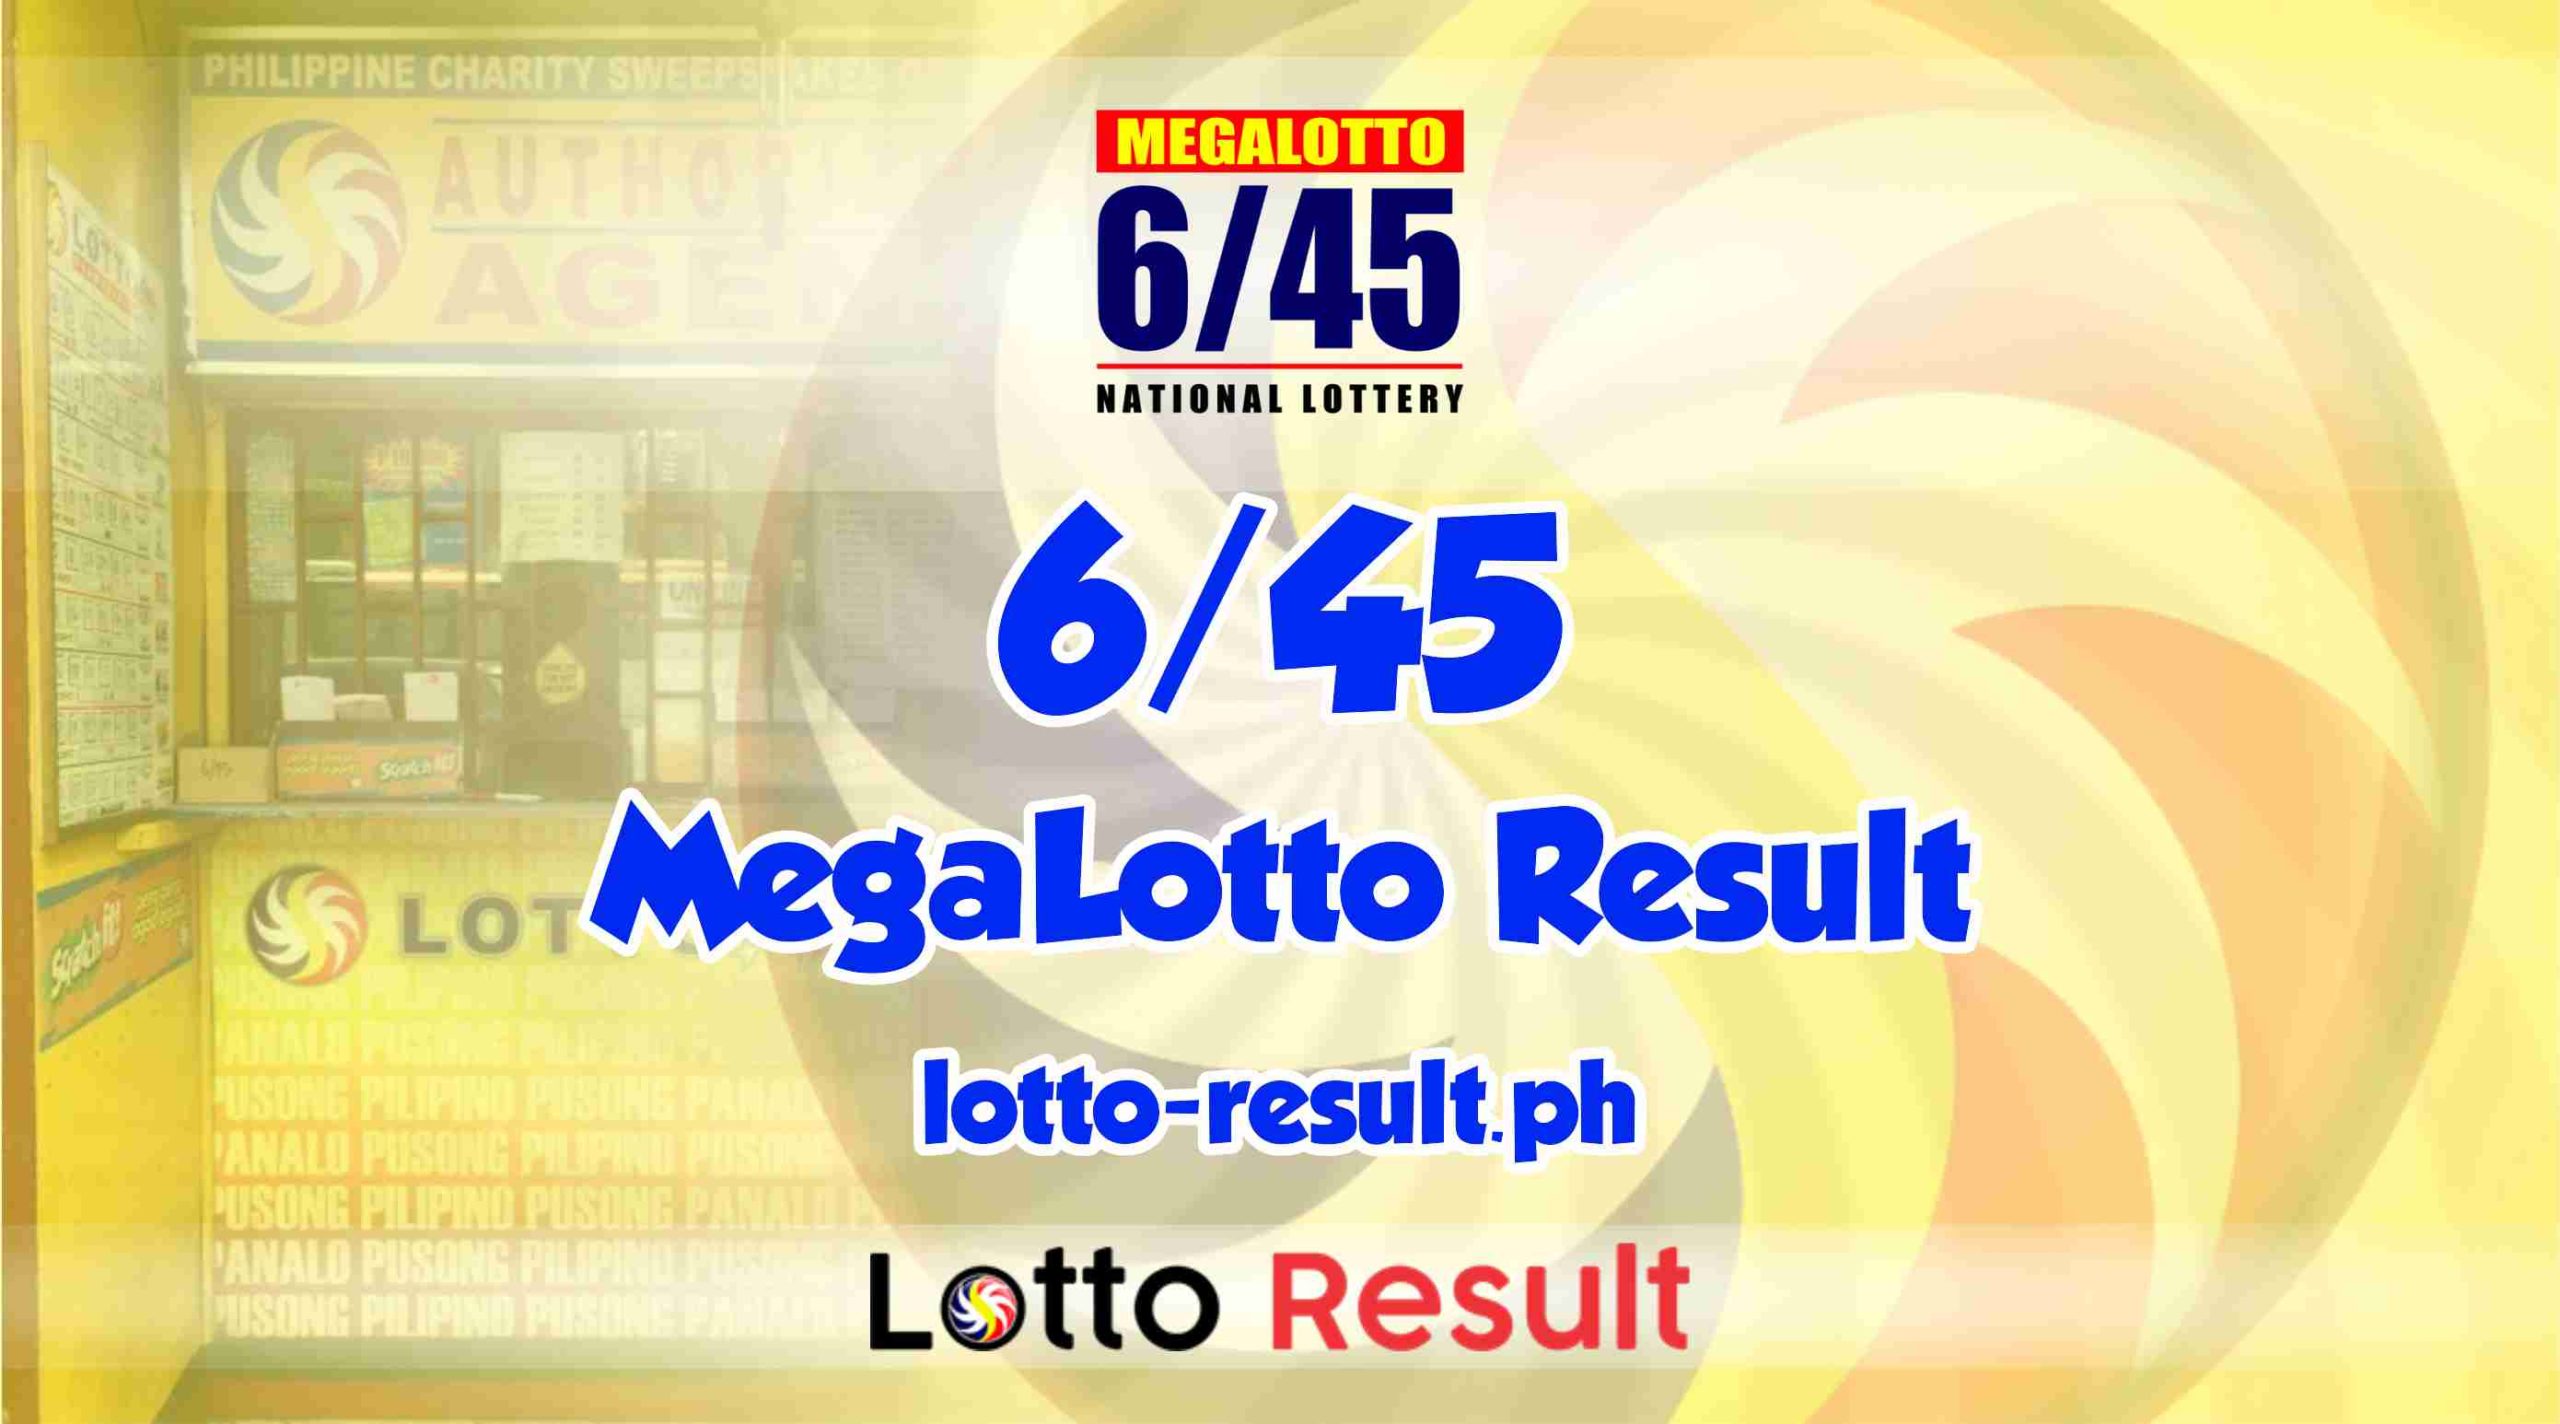 6/45 Lotto Result Today, Wednesday, April 20, 2022 Official PCSO